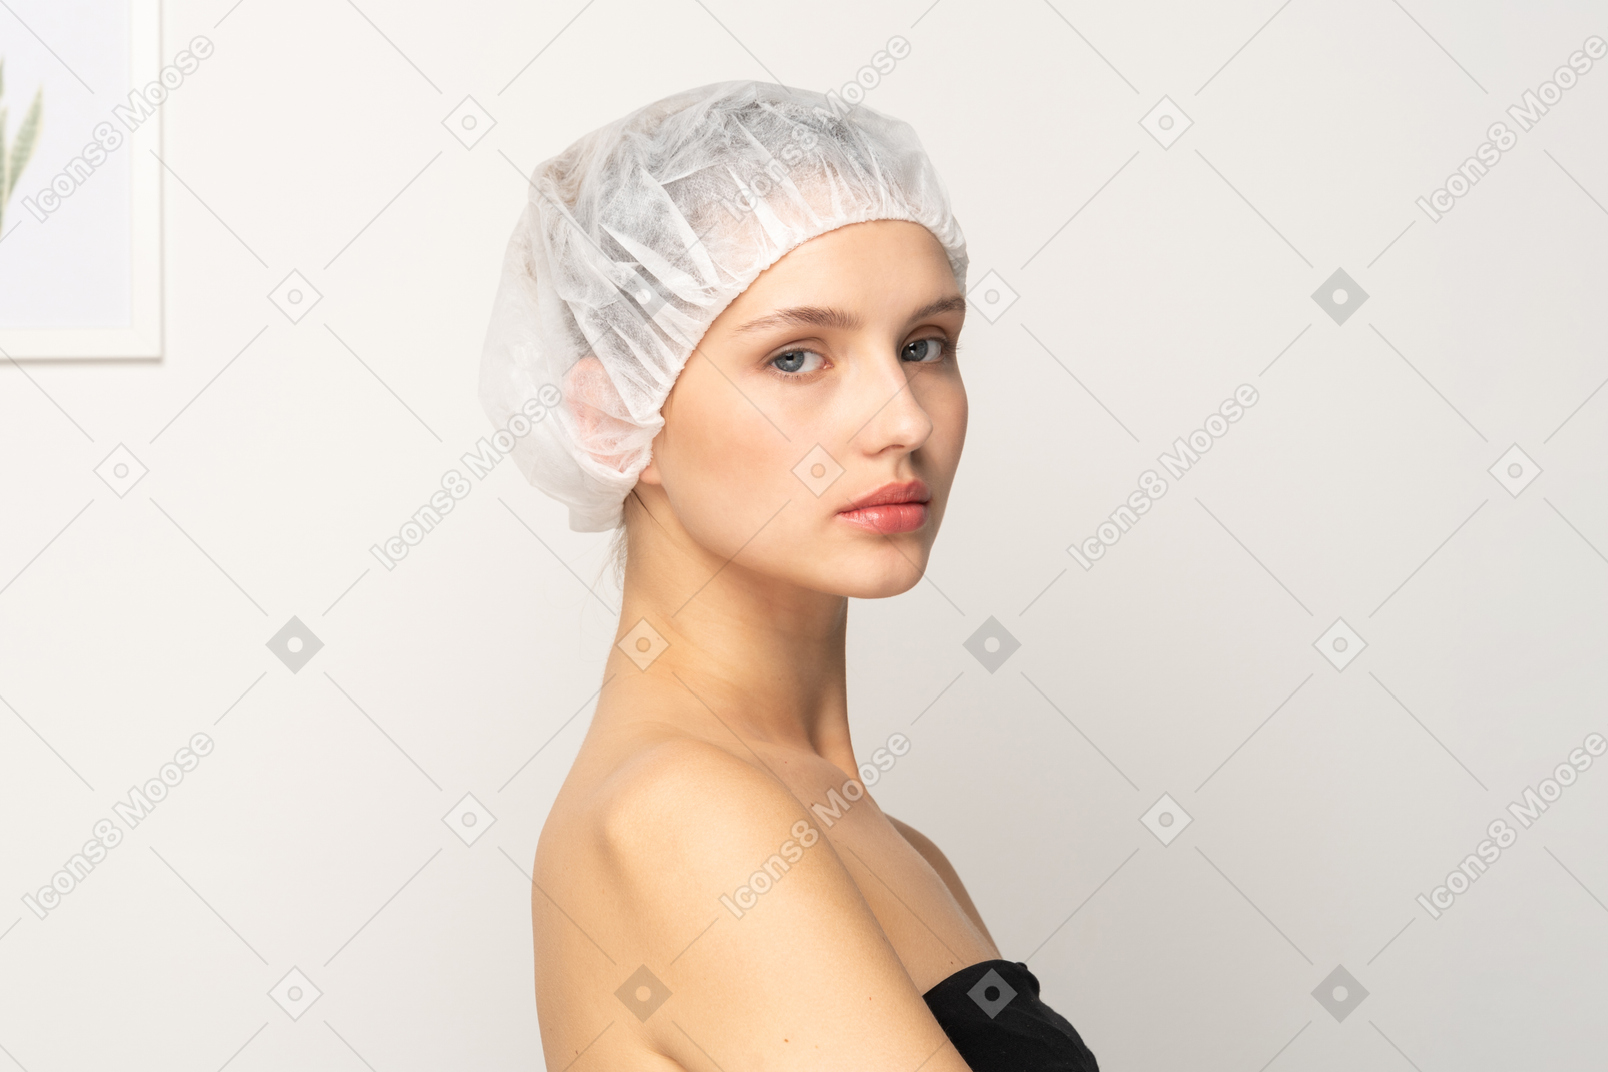 Portrait of a young female patient in medical cap